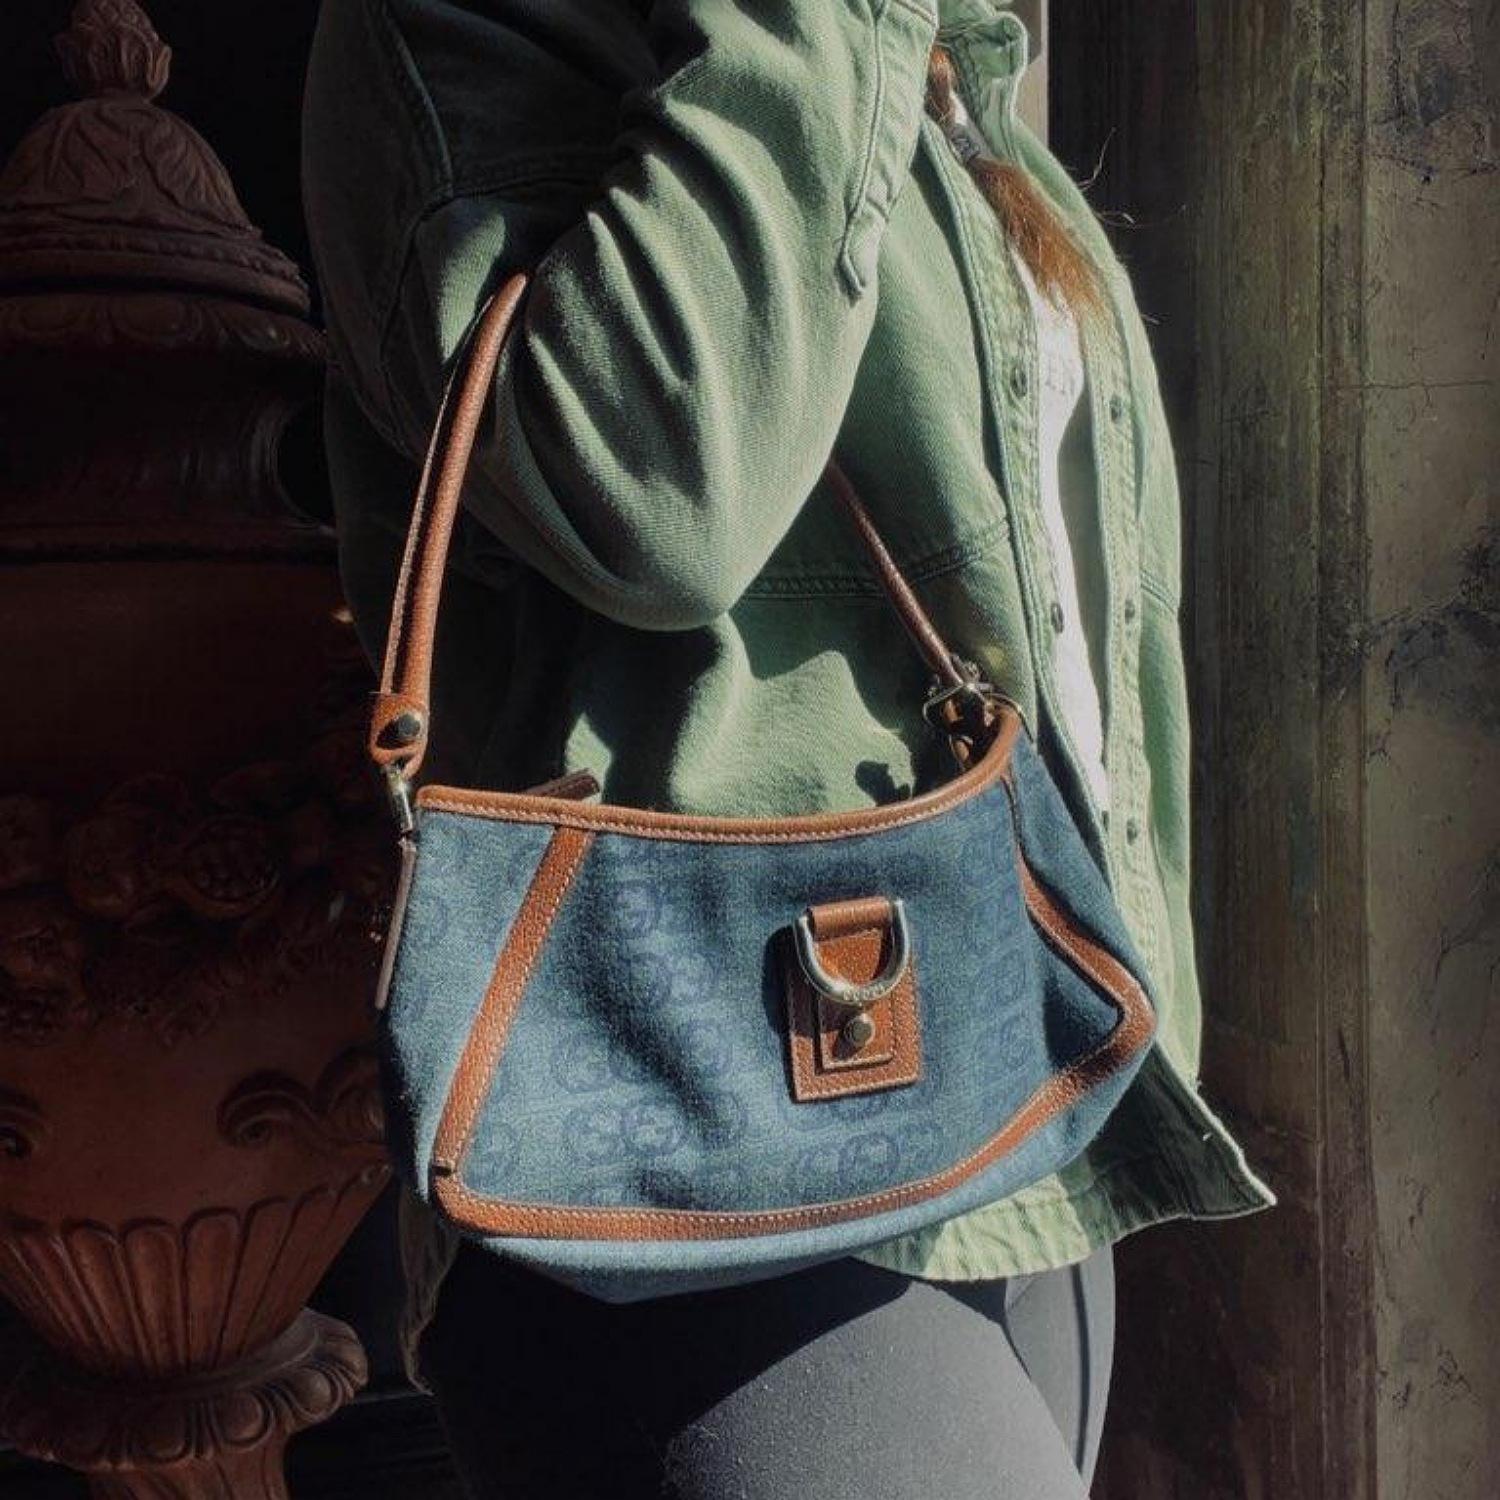 This Gucci D Ring Abbey Pochette Bag was made in Italy and it is finely crafted a blue denim and leather exterior with gold-tone hardware features. It has a rolled leather top handle. It has a zipper closure that opens up to a spacious brown twill